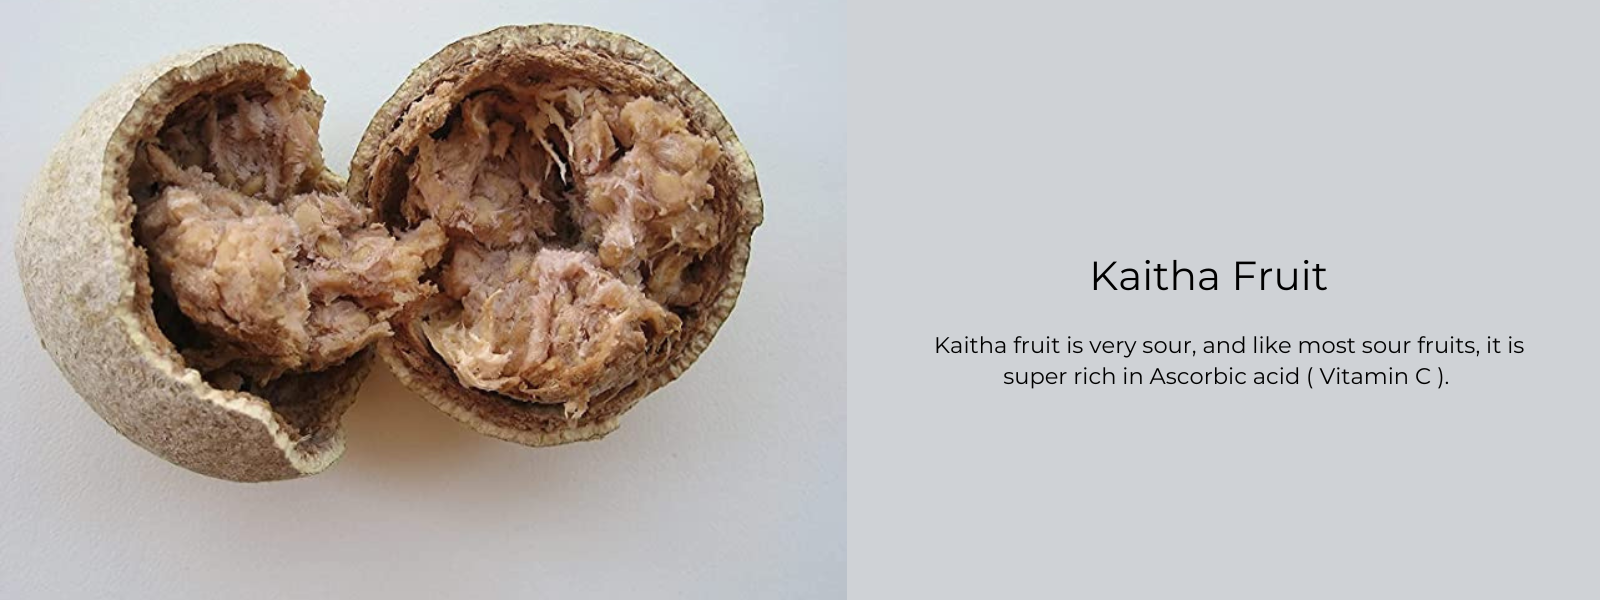 Kaitha Fruit - Health Benefits, Uses and Important Facts